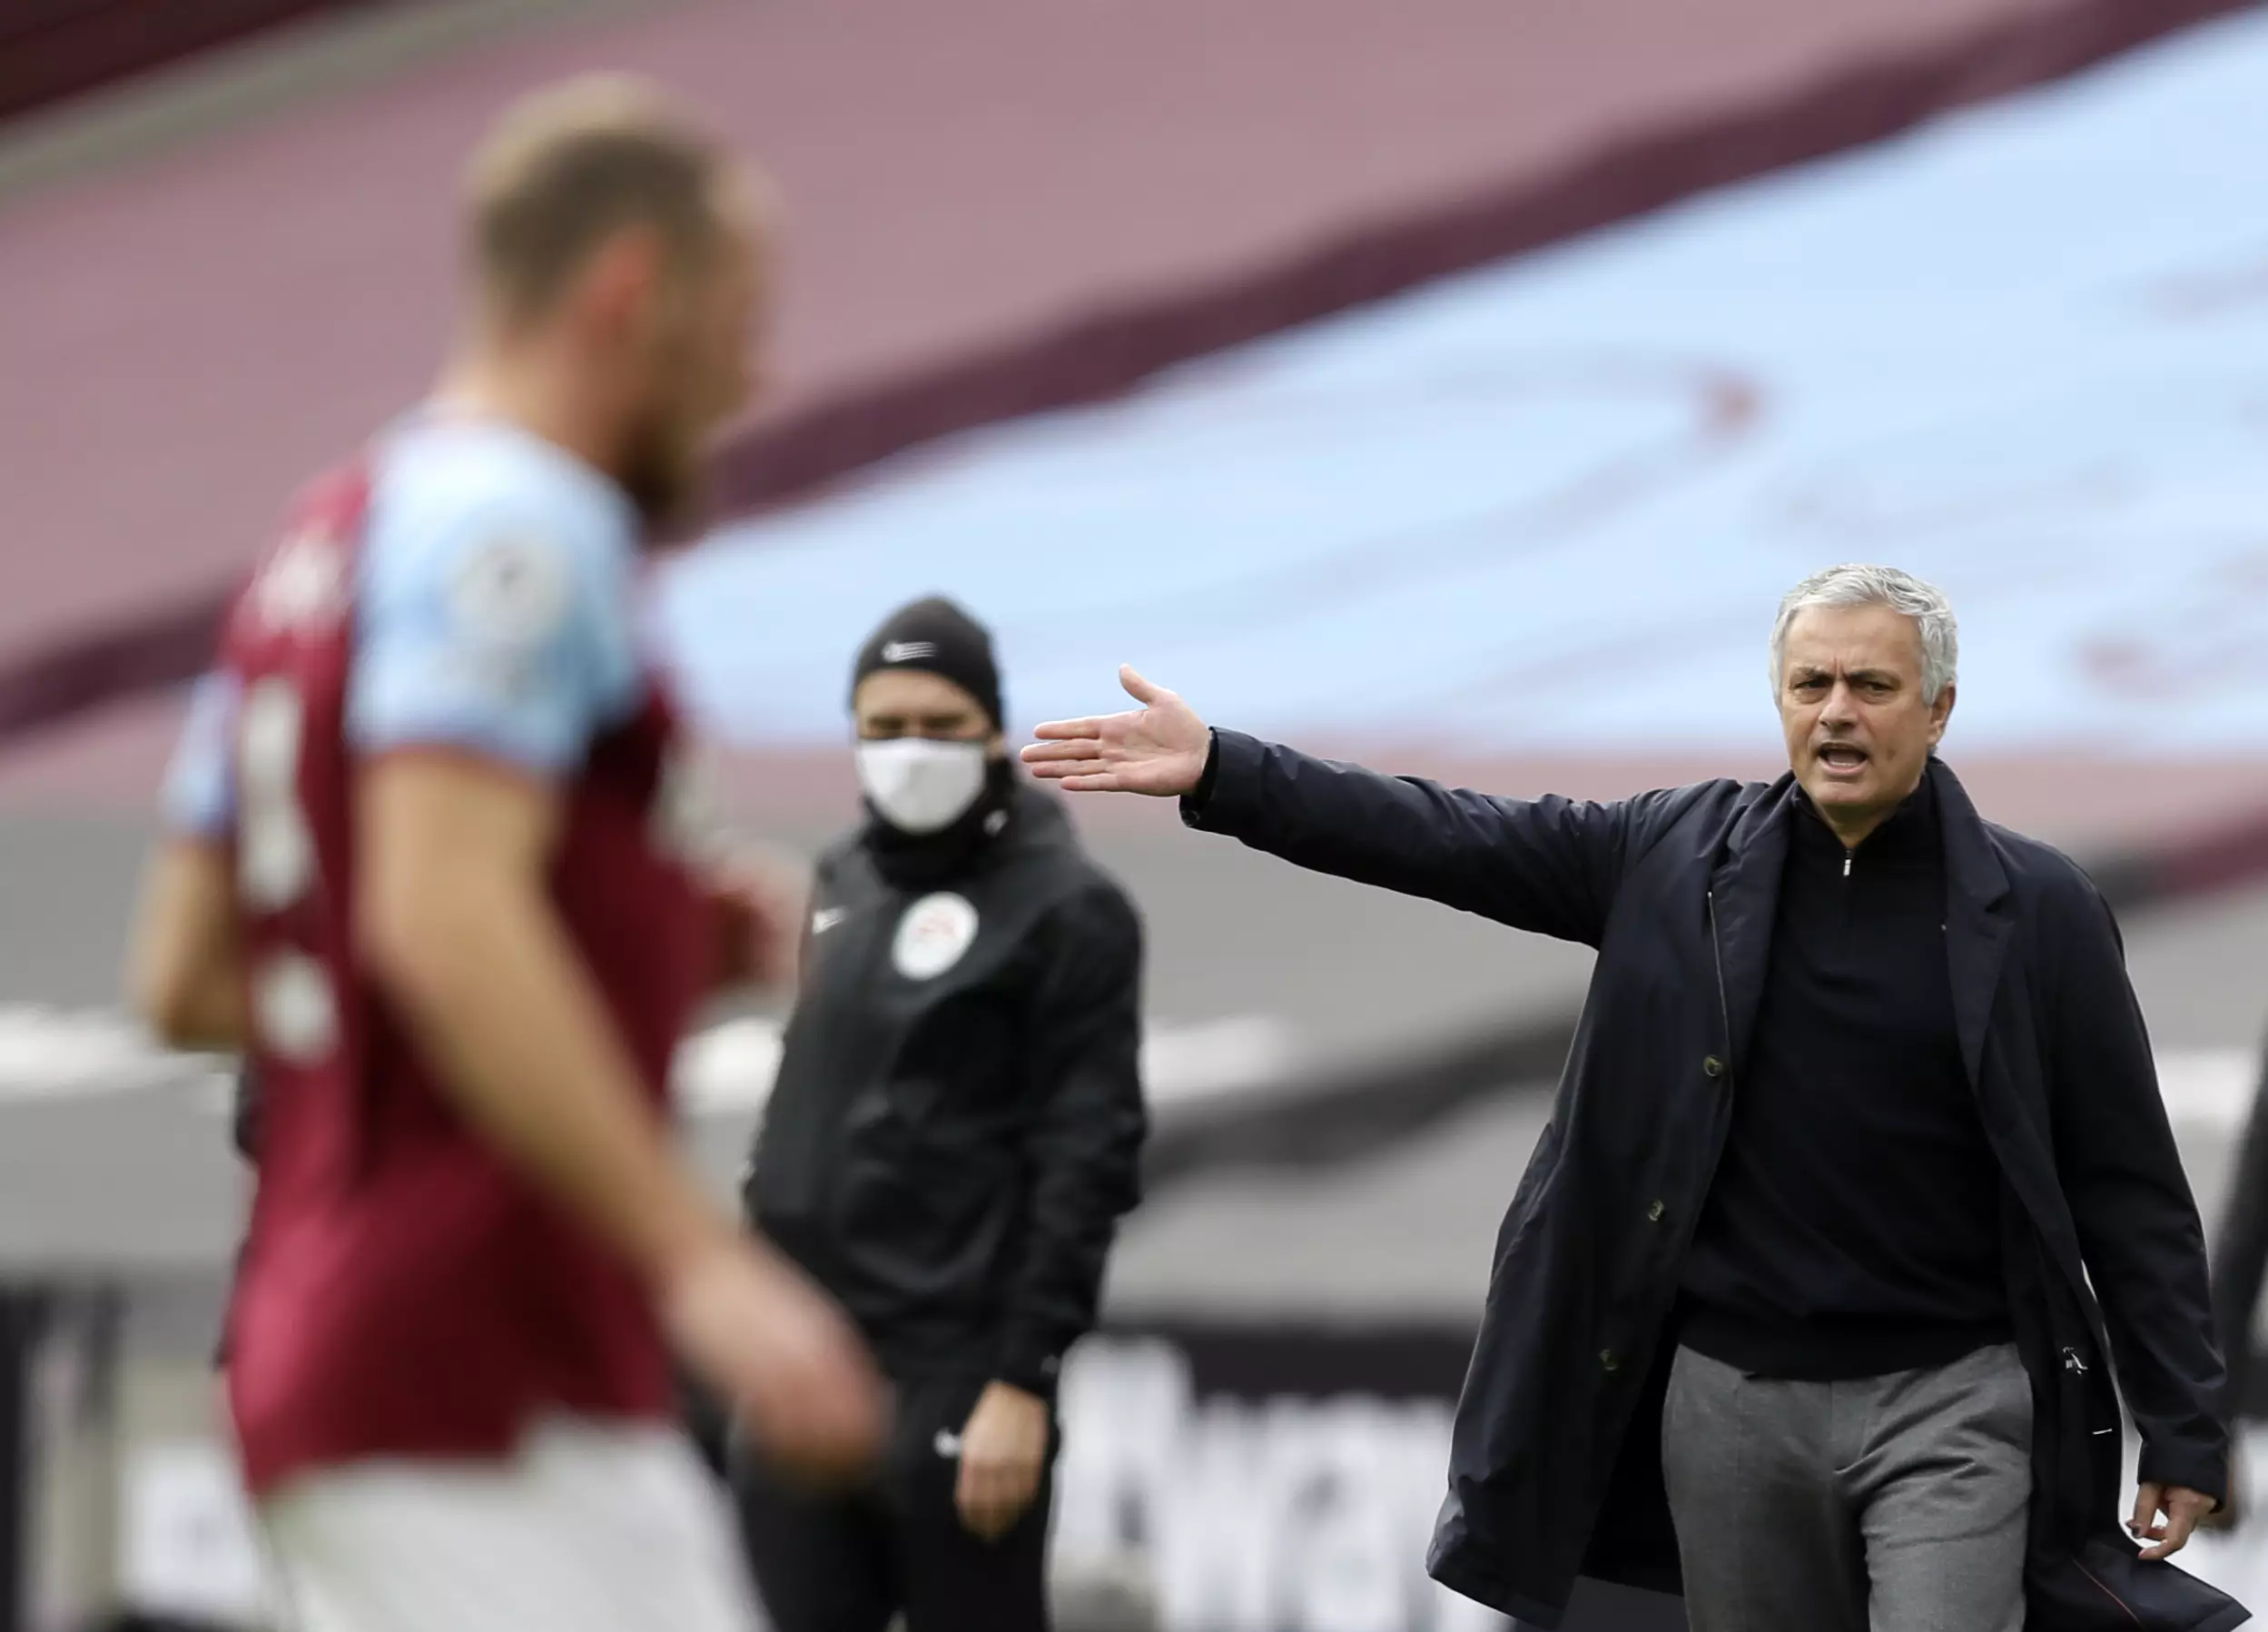 Mourinho shouts instructions during his side's defeat. Image: PA Images